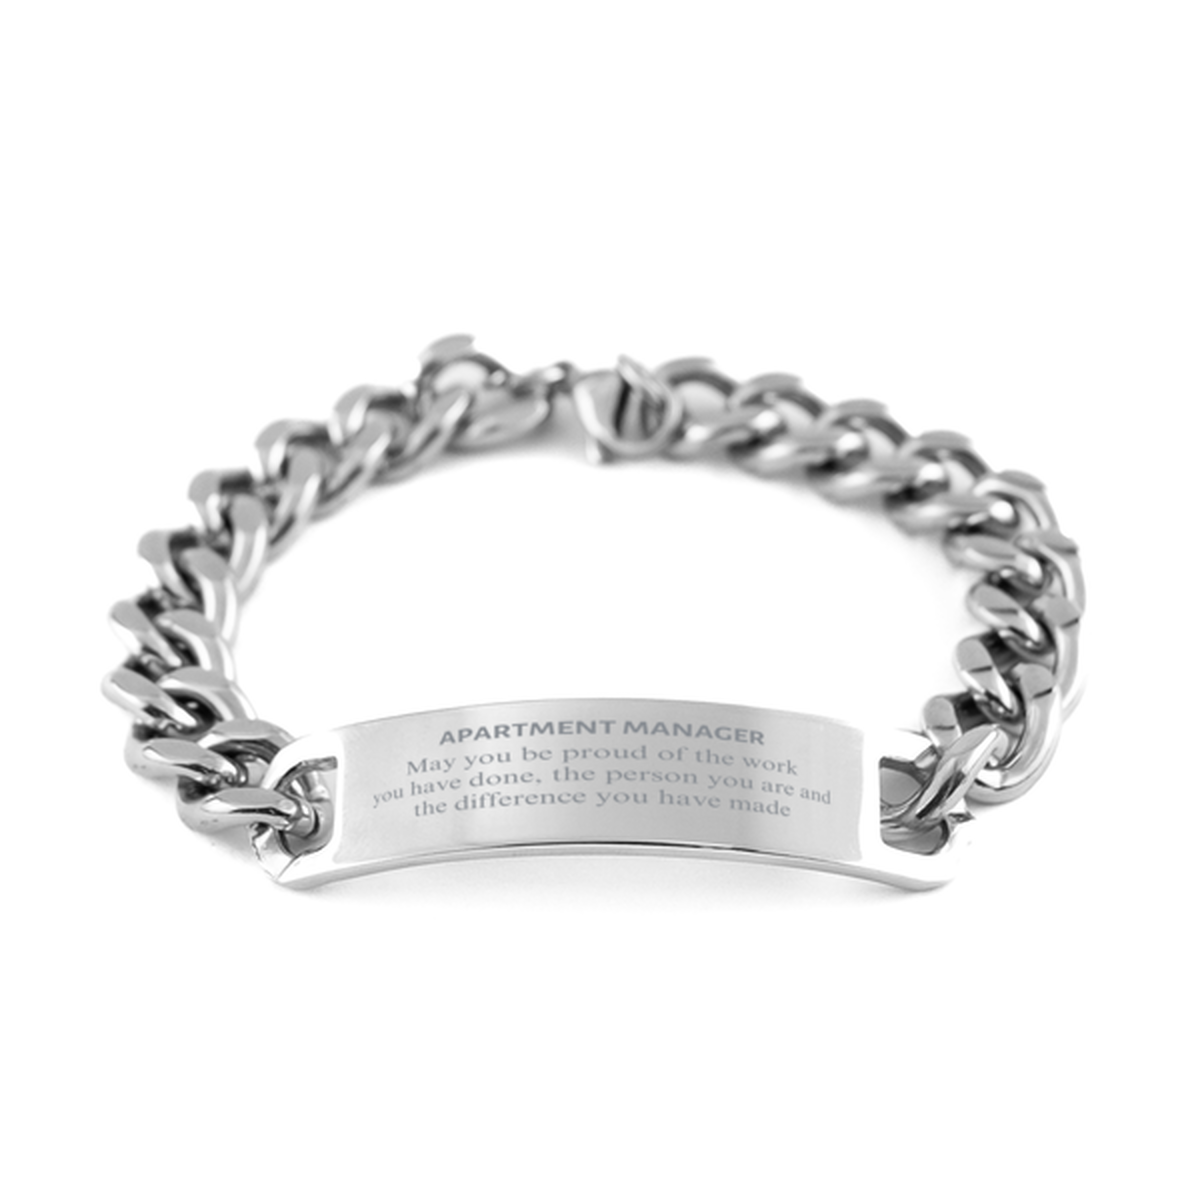 Apartment Manager May you be proud of the work you have done, Retirement Apartment Manager Cuban Chain Stainless Steel Bracelet for Colleague Appreciation Gifts Amazing for Apartment Manager